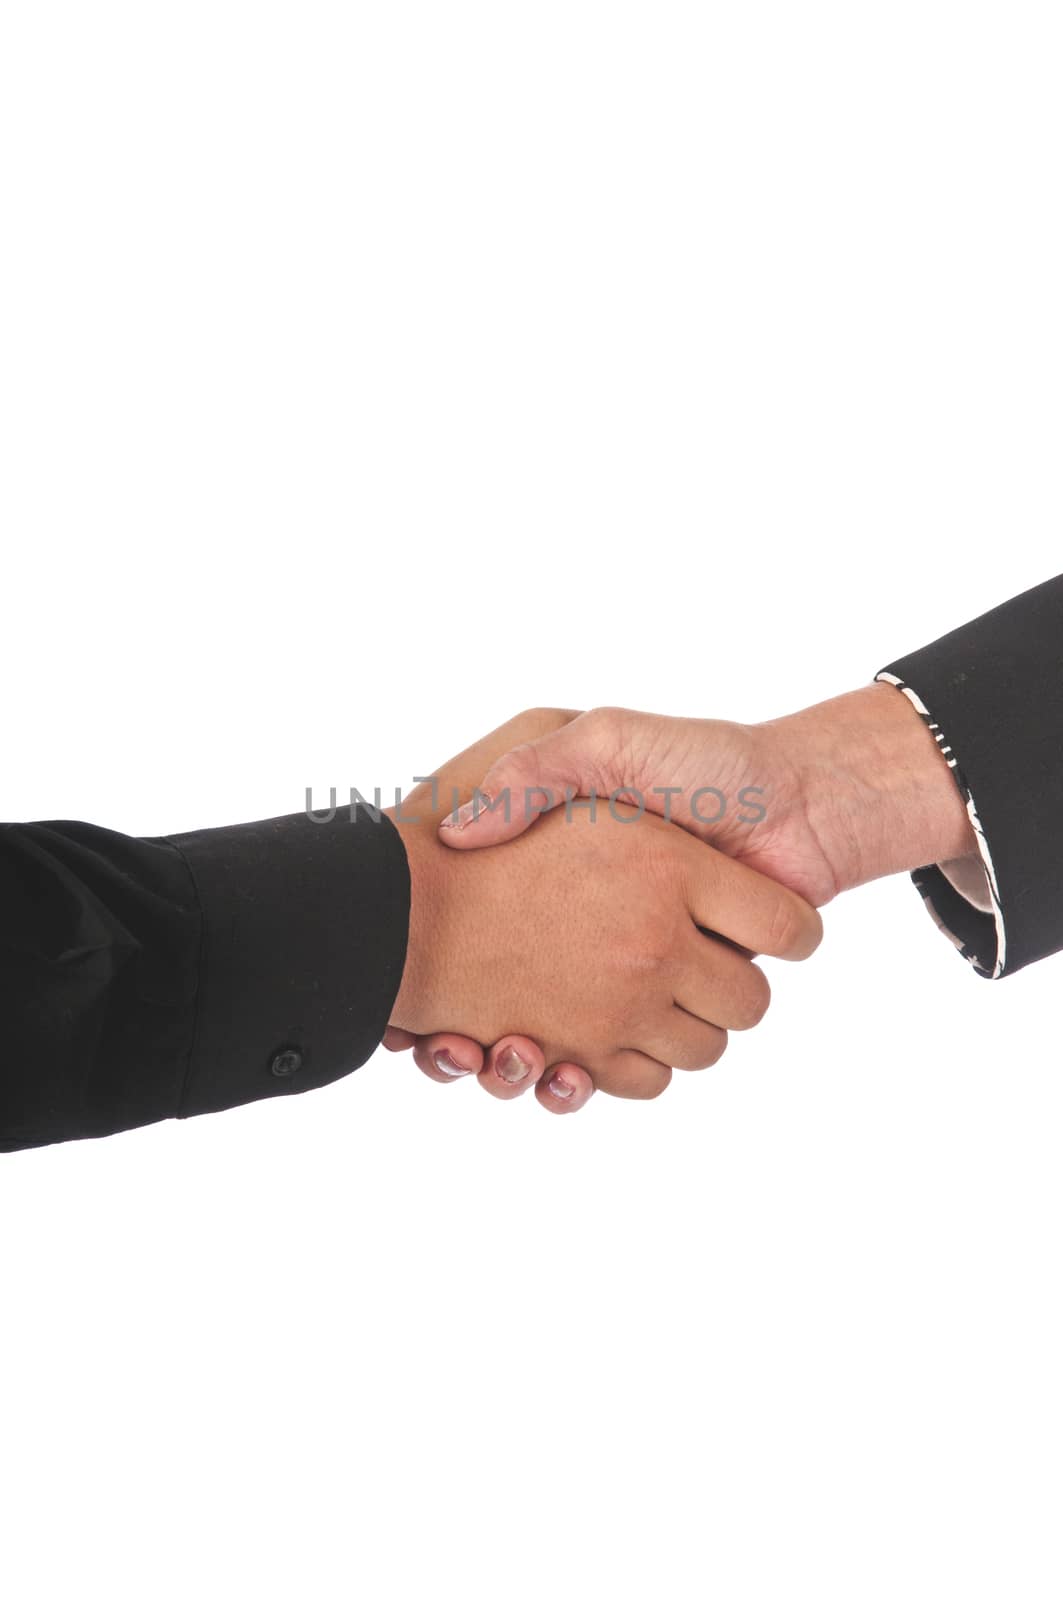 Businesswoman shaking the hand of a male client, isolated on a white background.